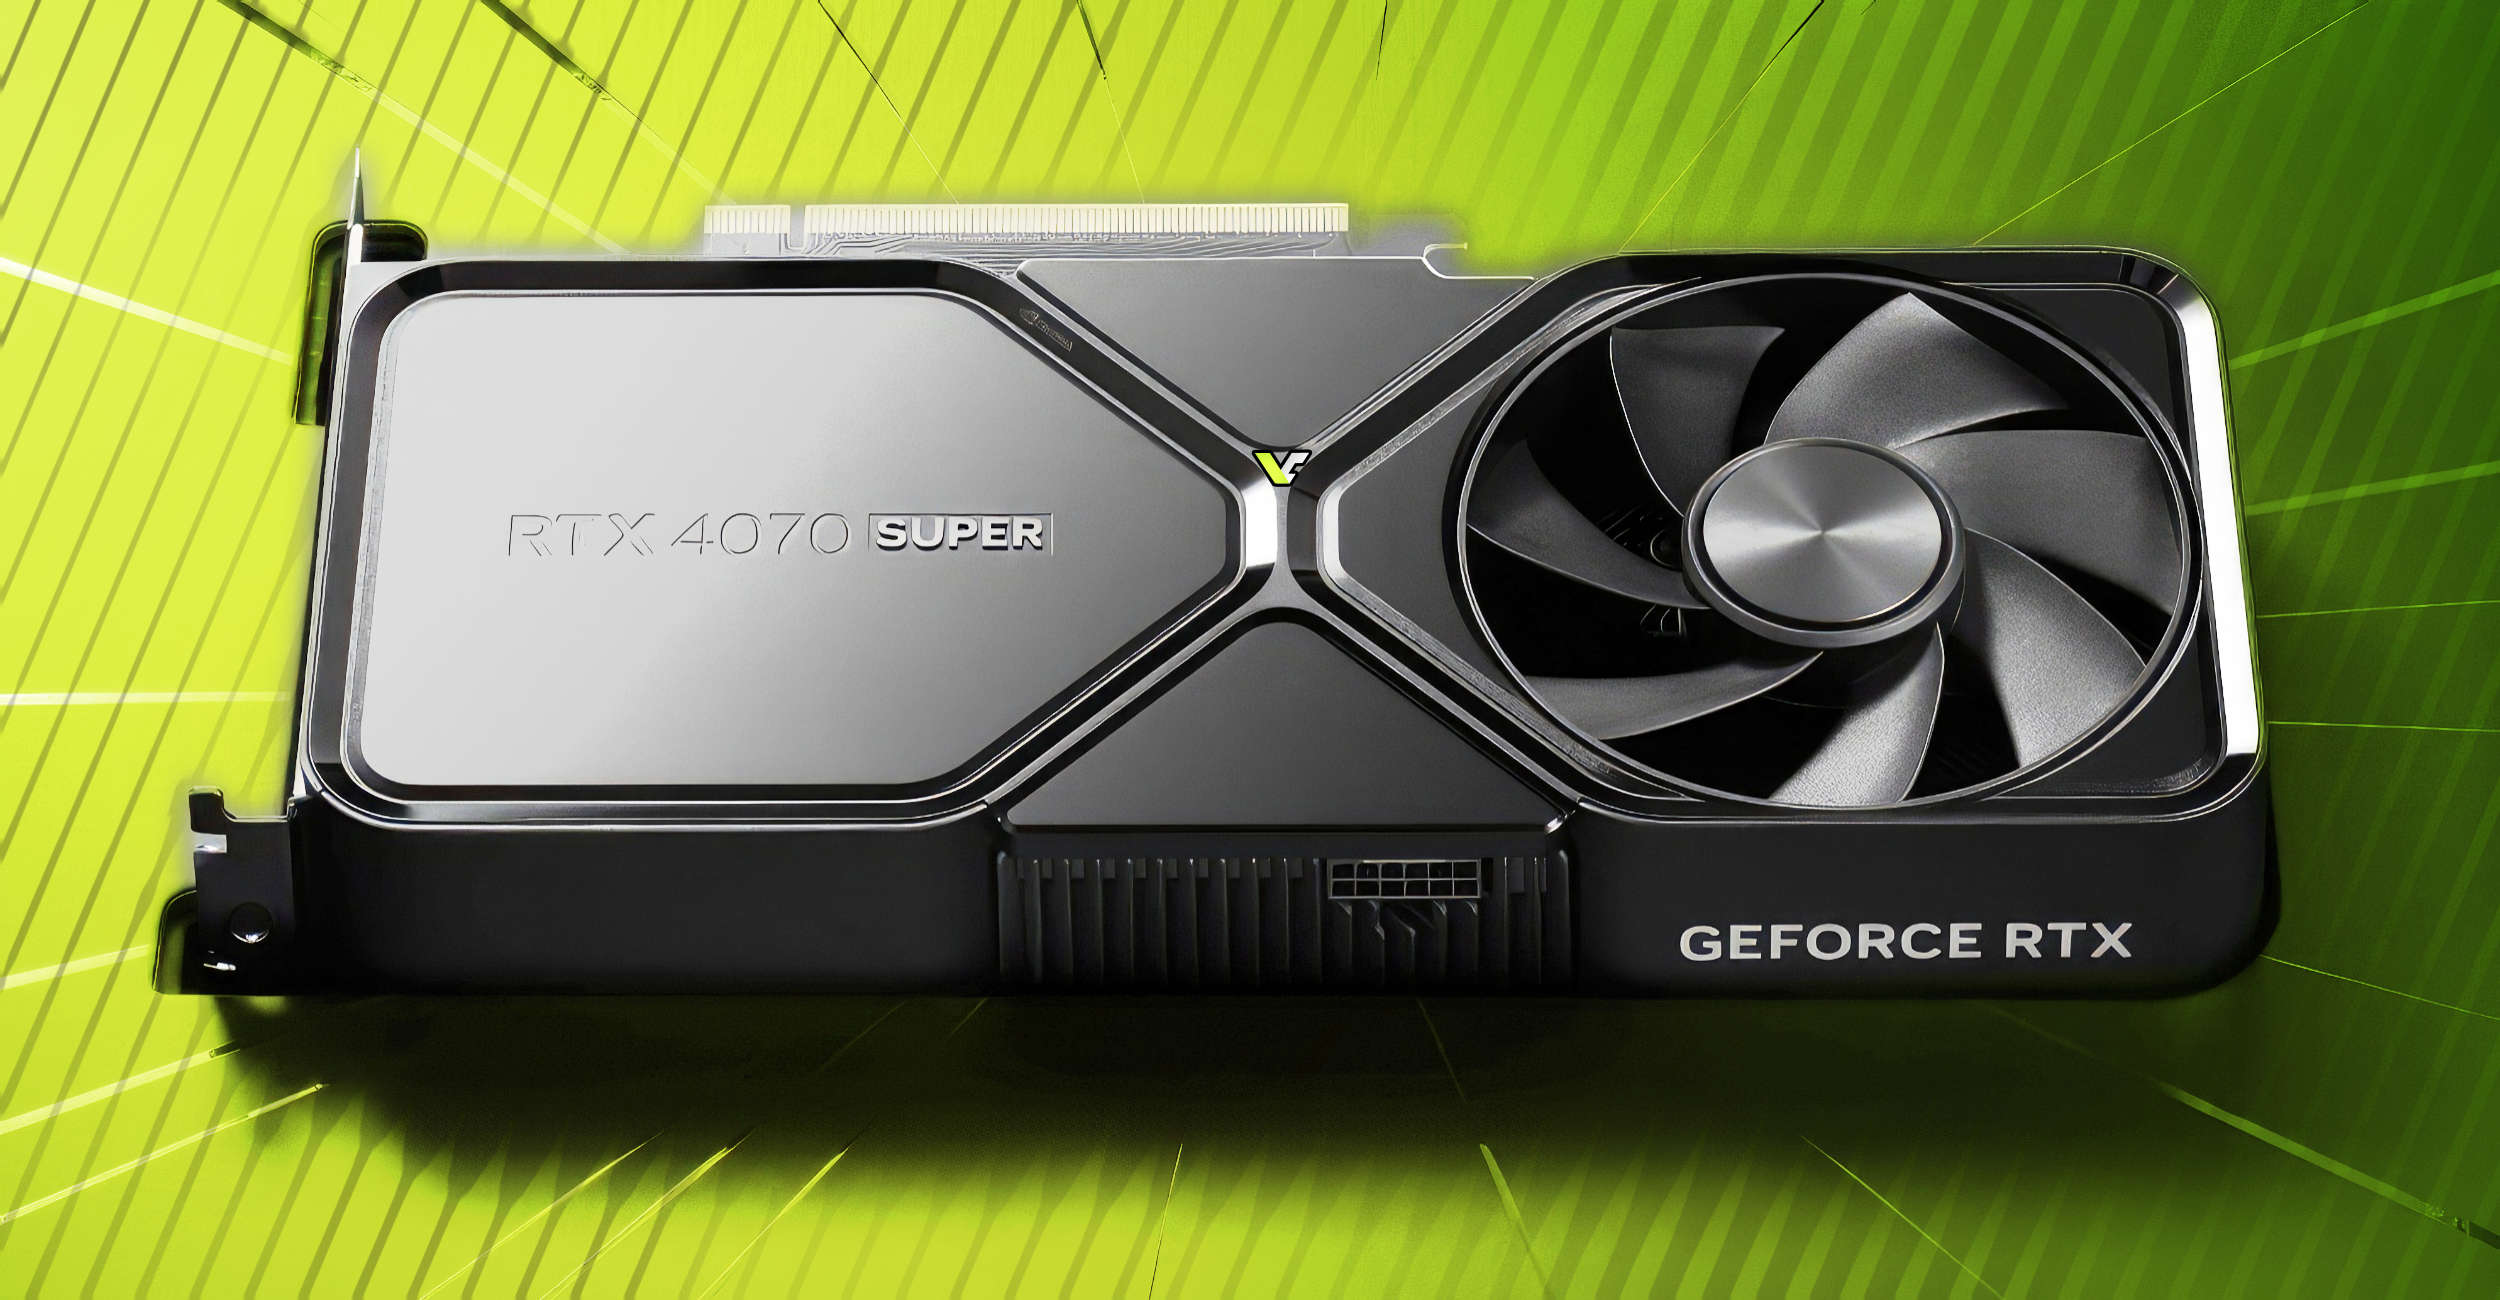 Get Ready for a Gaming Revolution: NVIDIA Introduces GeForce RTX 4070 SUPER with Mind-Blowing 7168 CUDA Cores